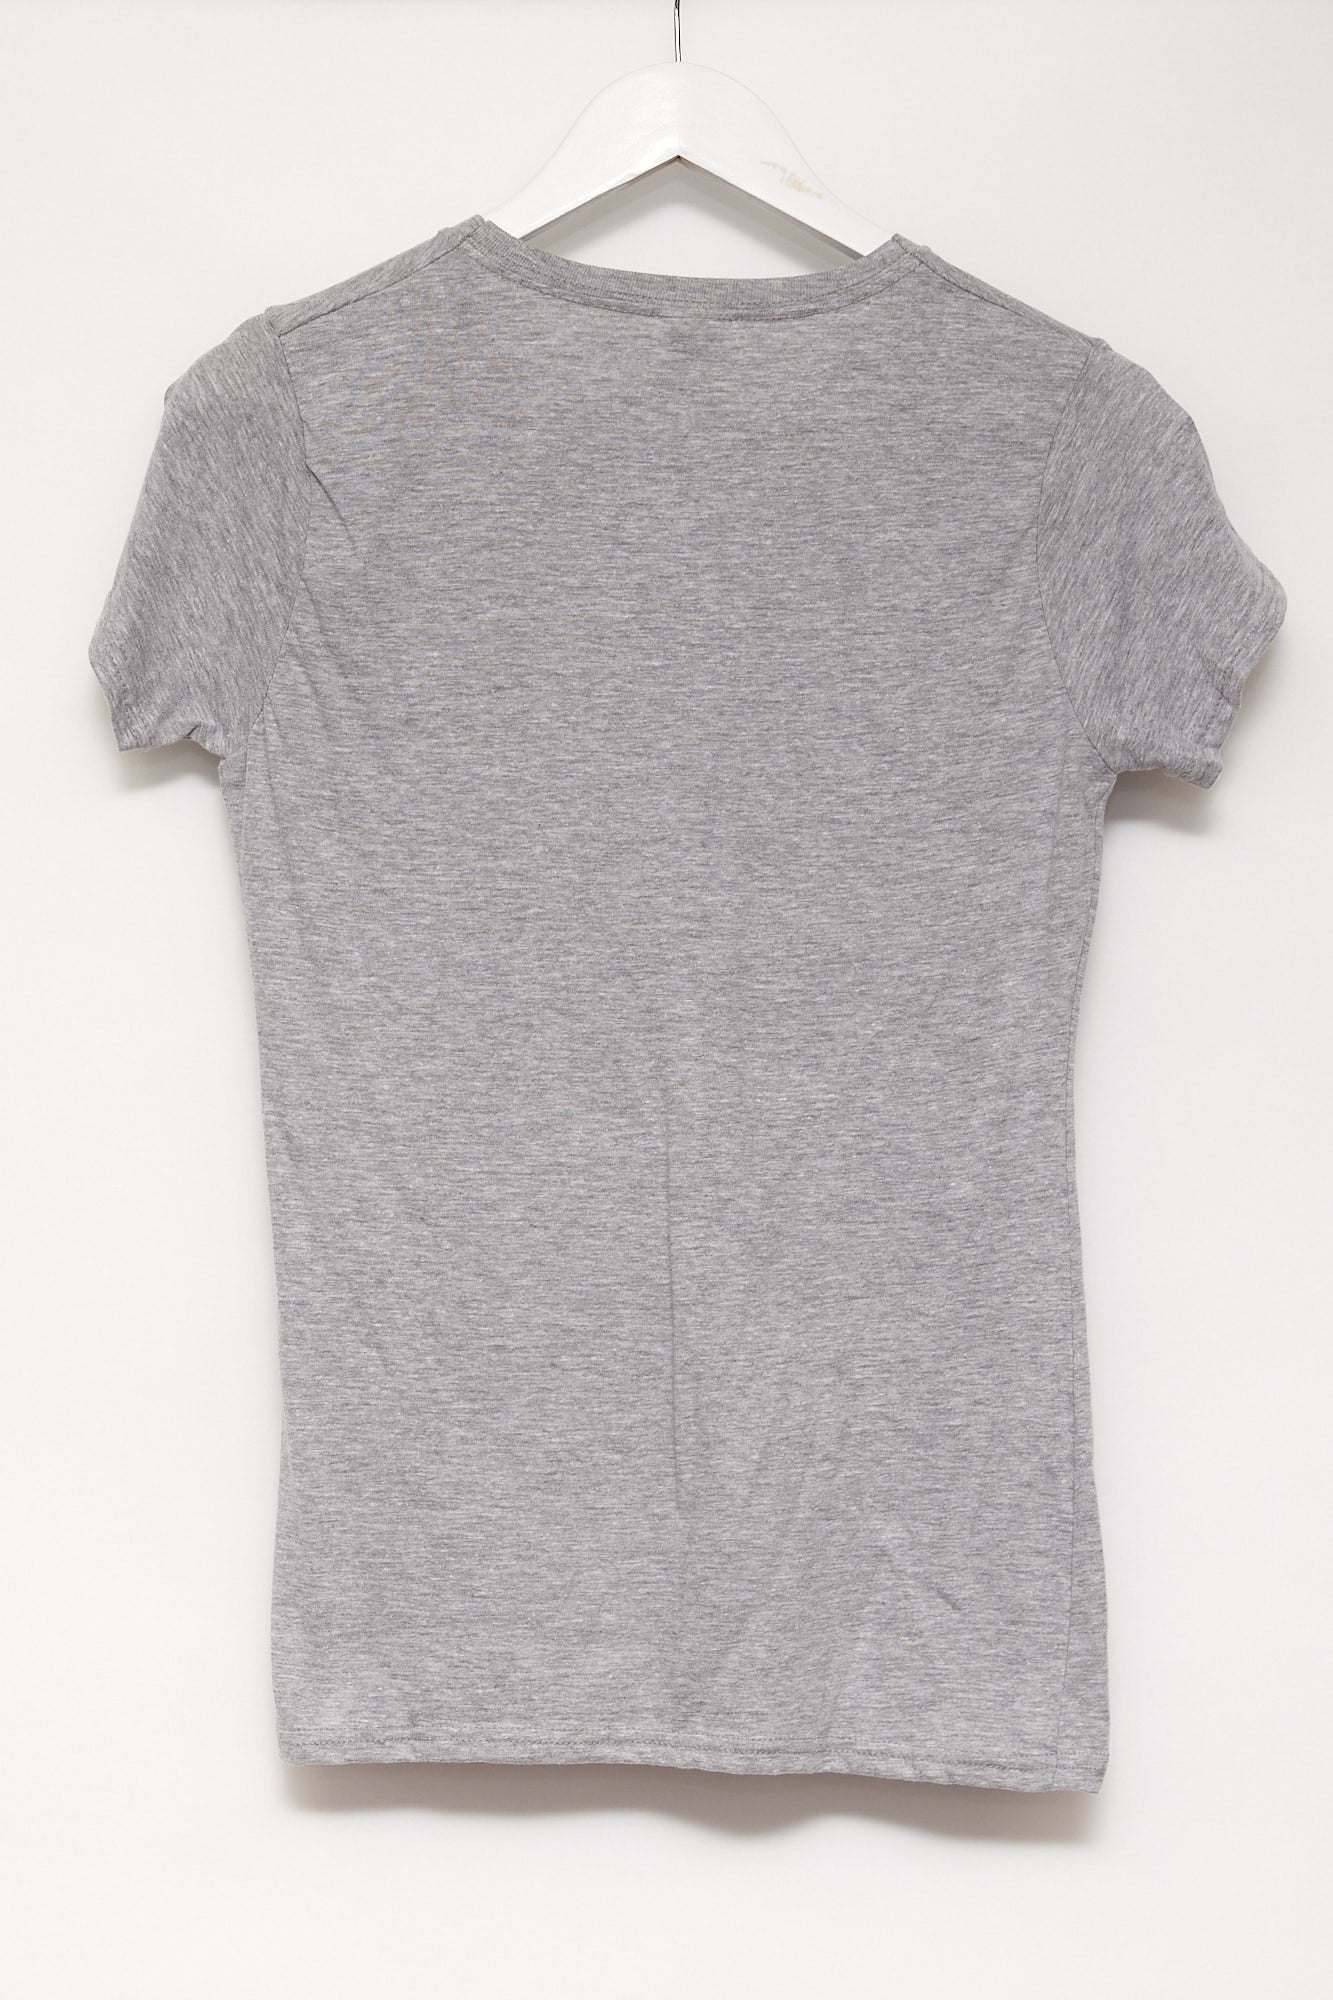 Womens Fruit of the Loom Grey T-shirt size small